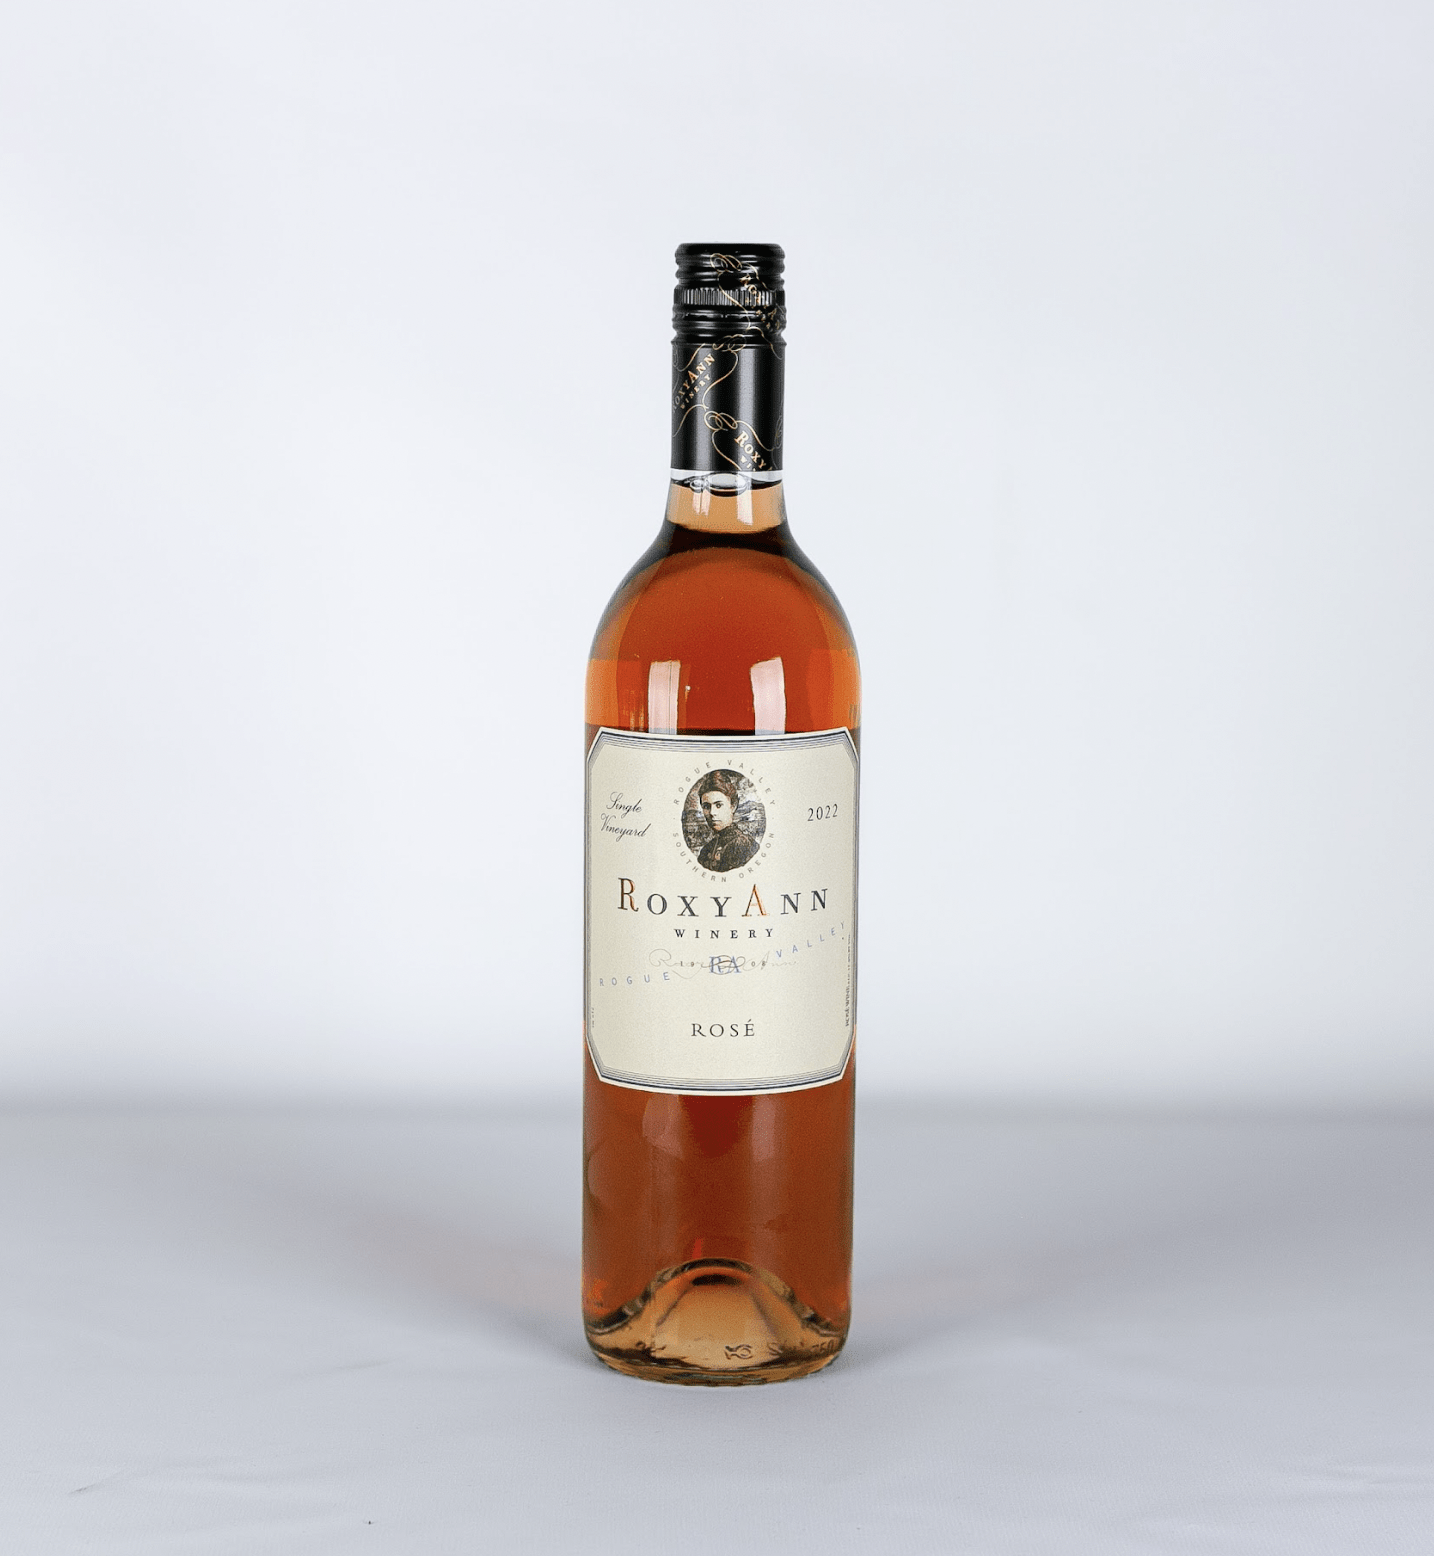 An image of the RoxyAnn Winery Rosé wine, a delightful pink wine with notes of raspberry that add a light, summery element to any fall wine cocktail.